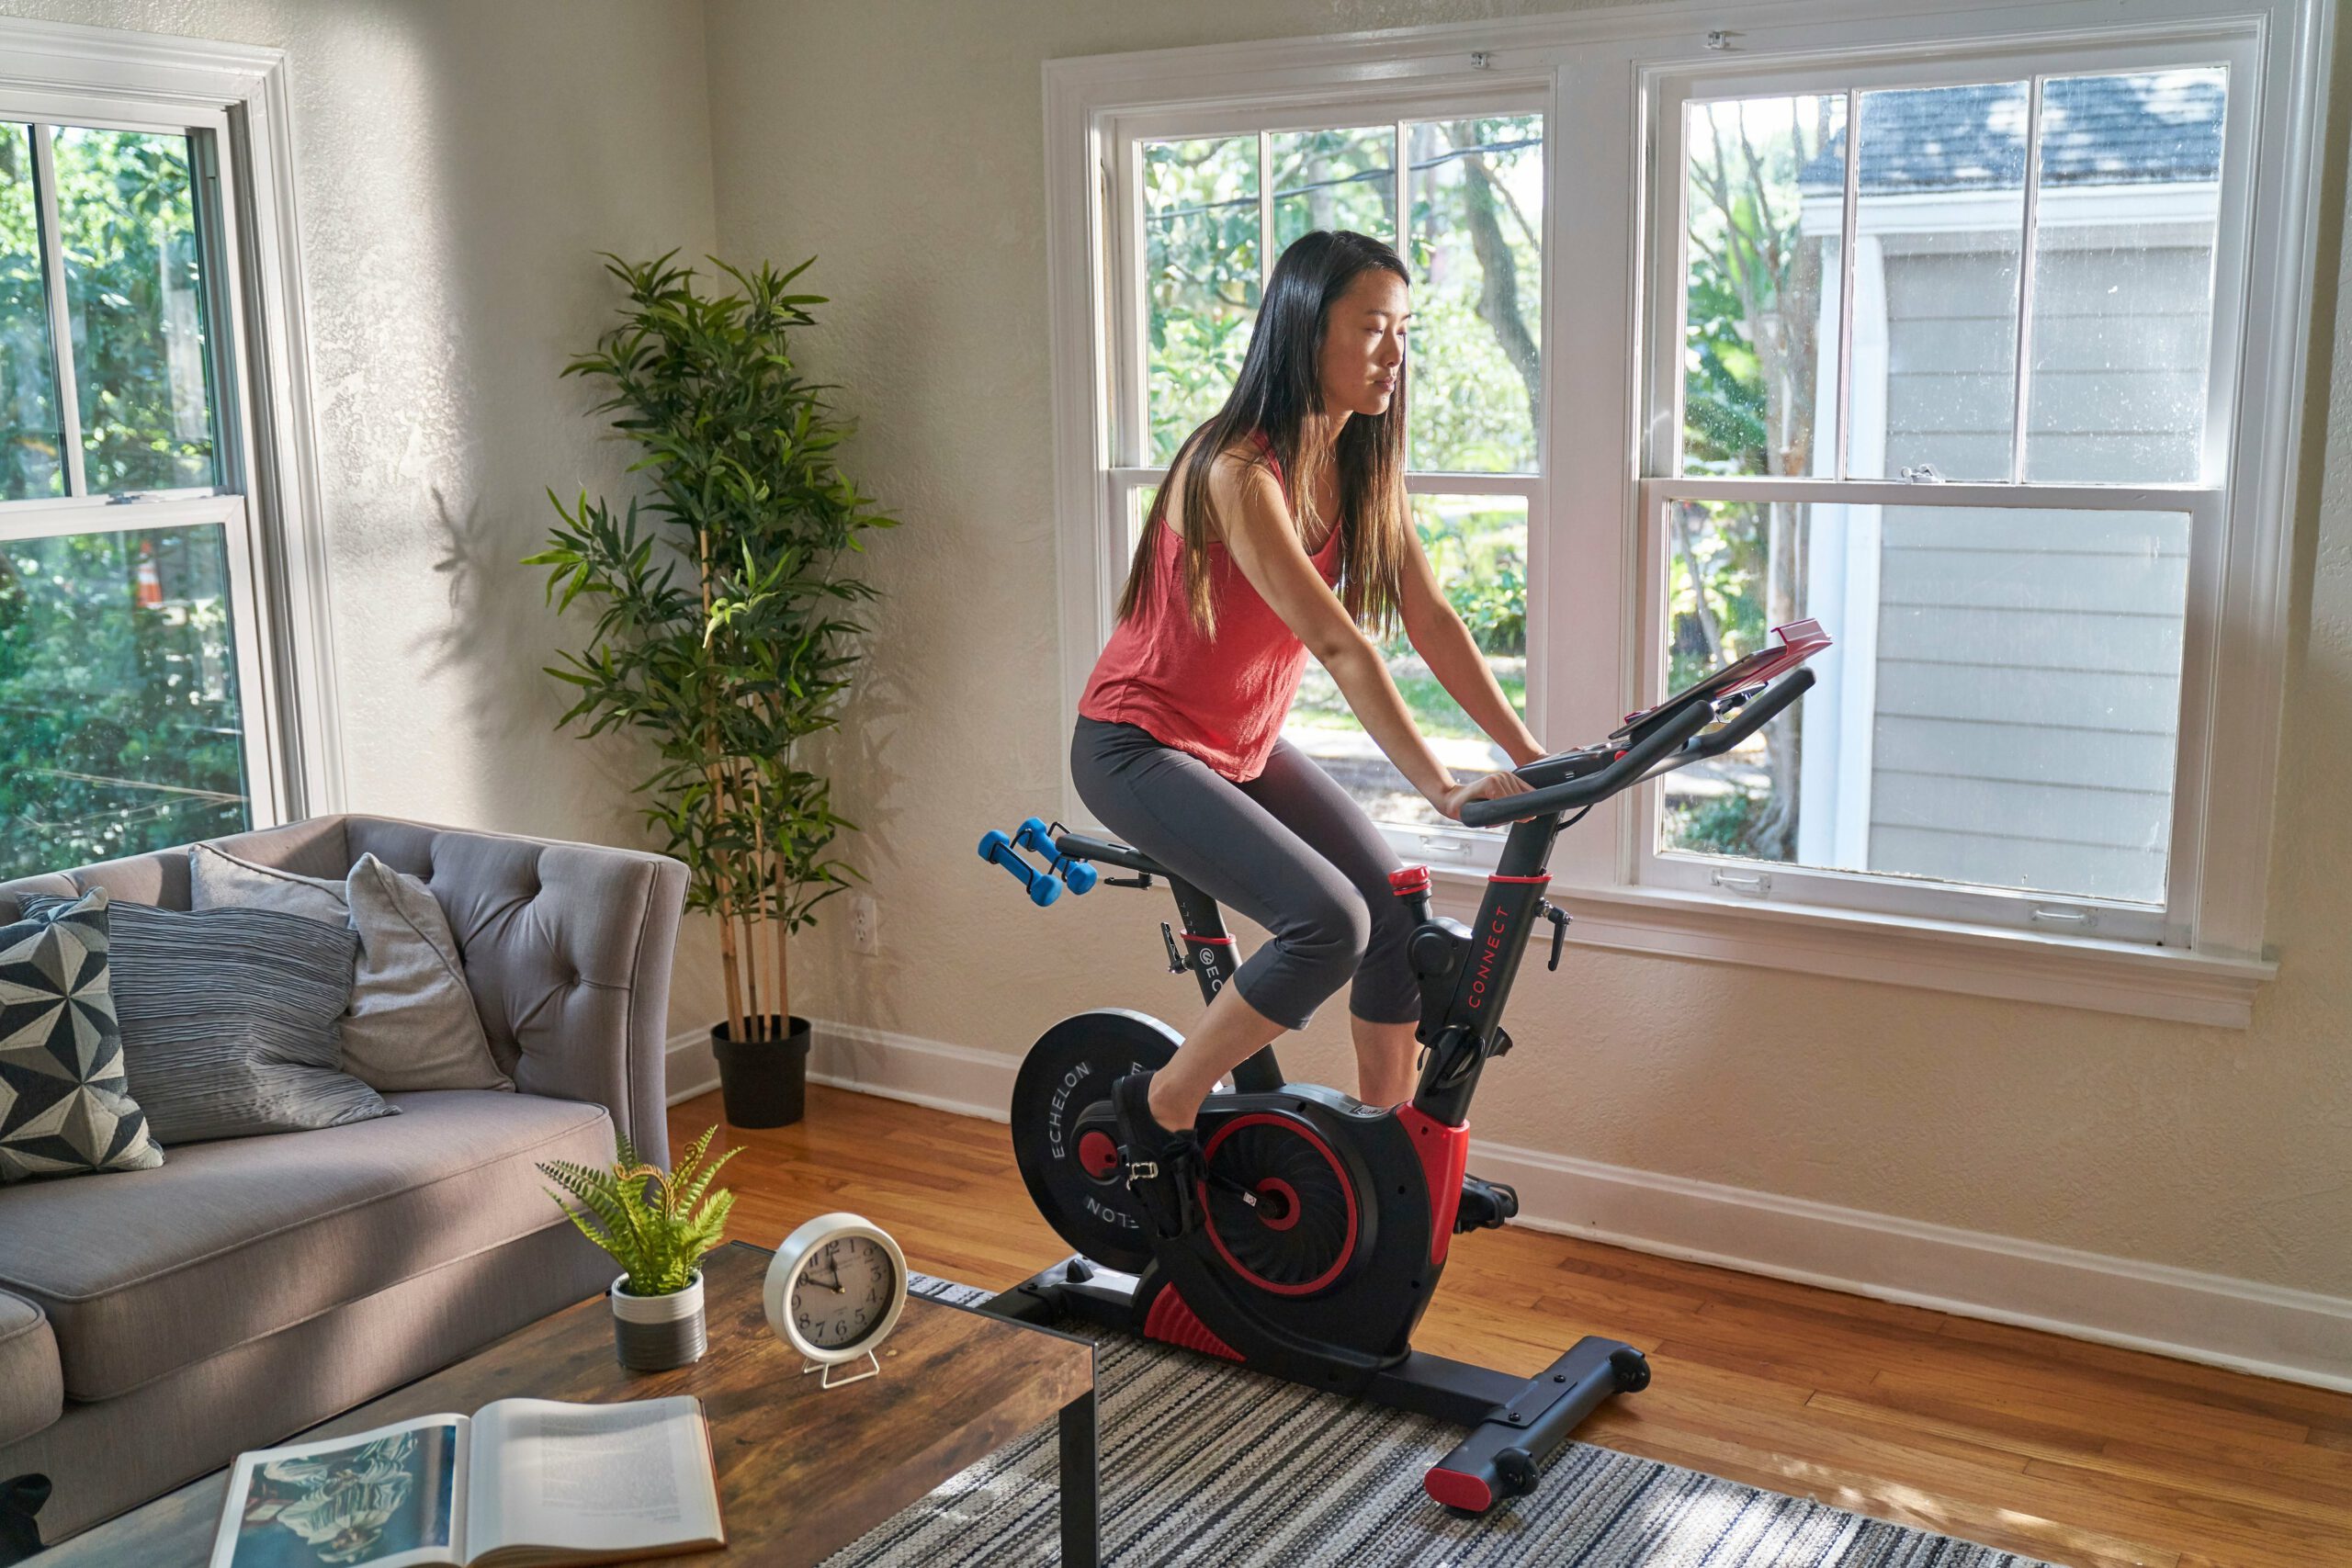 A woman riding an Echelon EX-3 bike in her living room in front of some windows